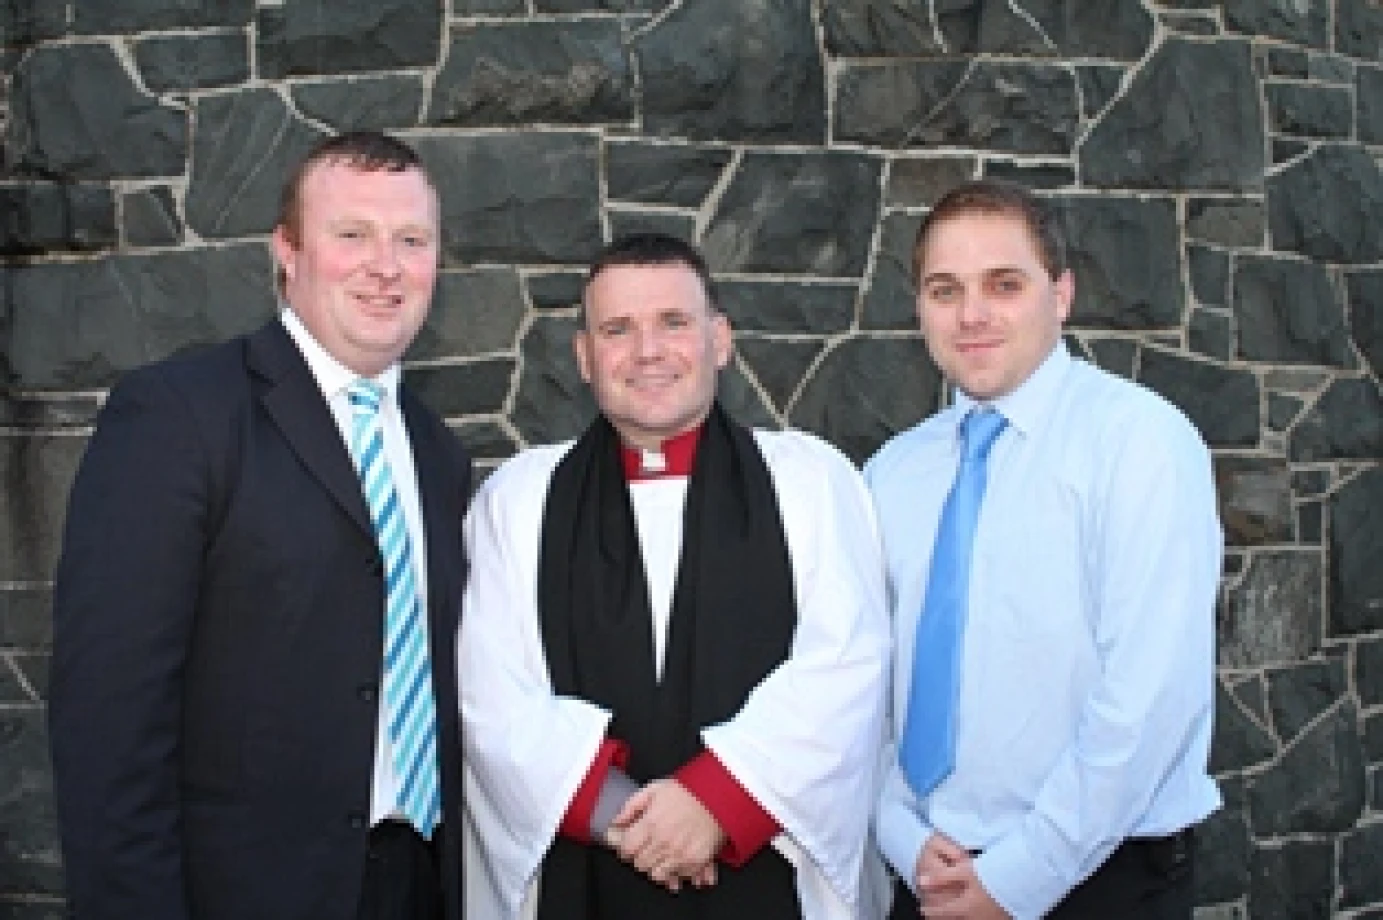 Dromore Cathedral has a new rector and dean